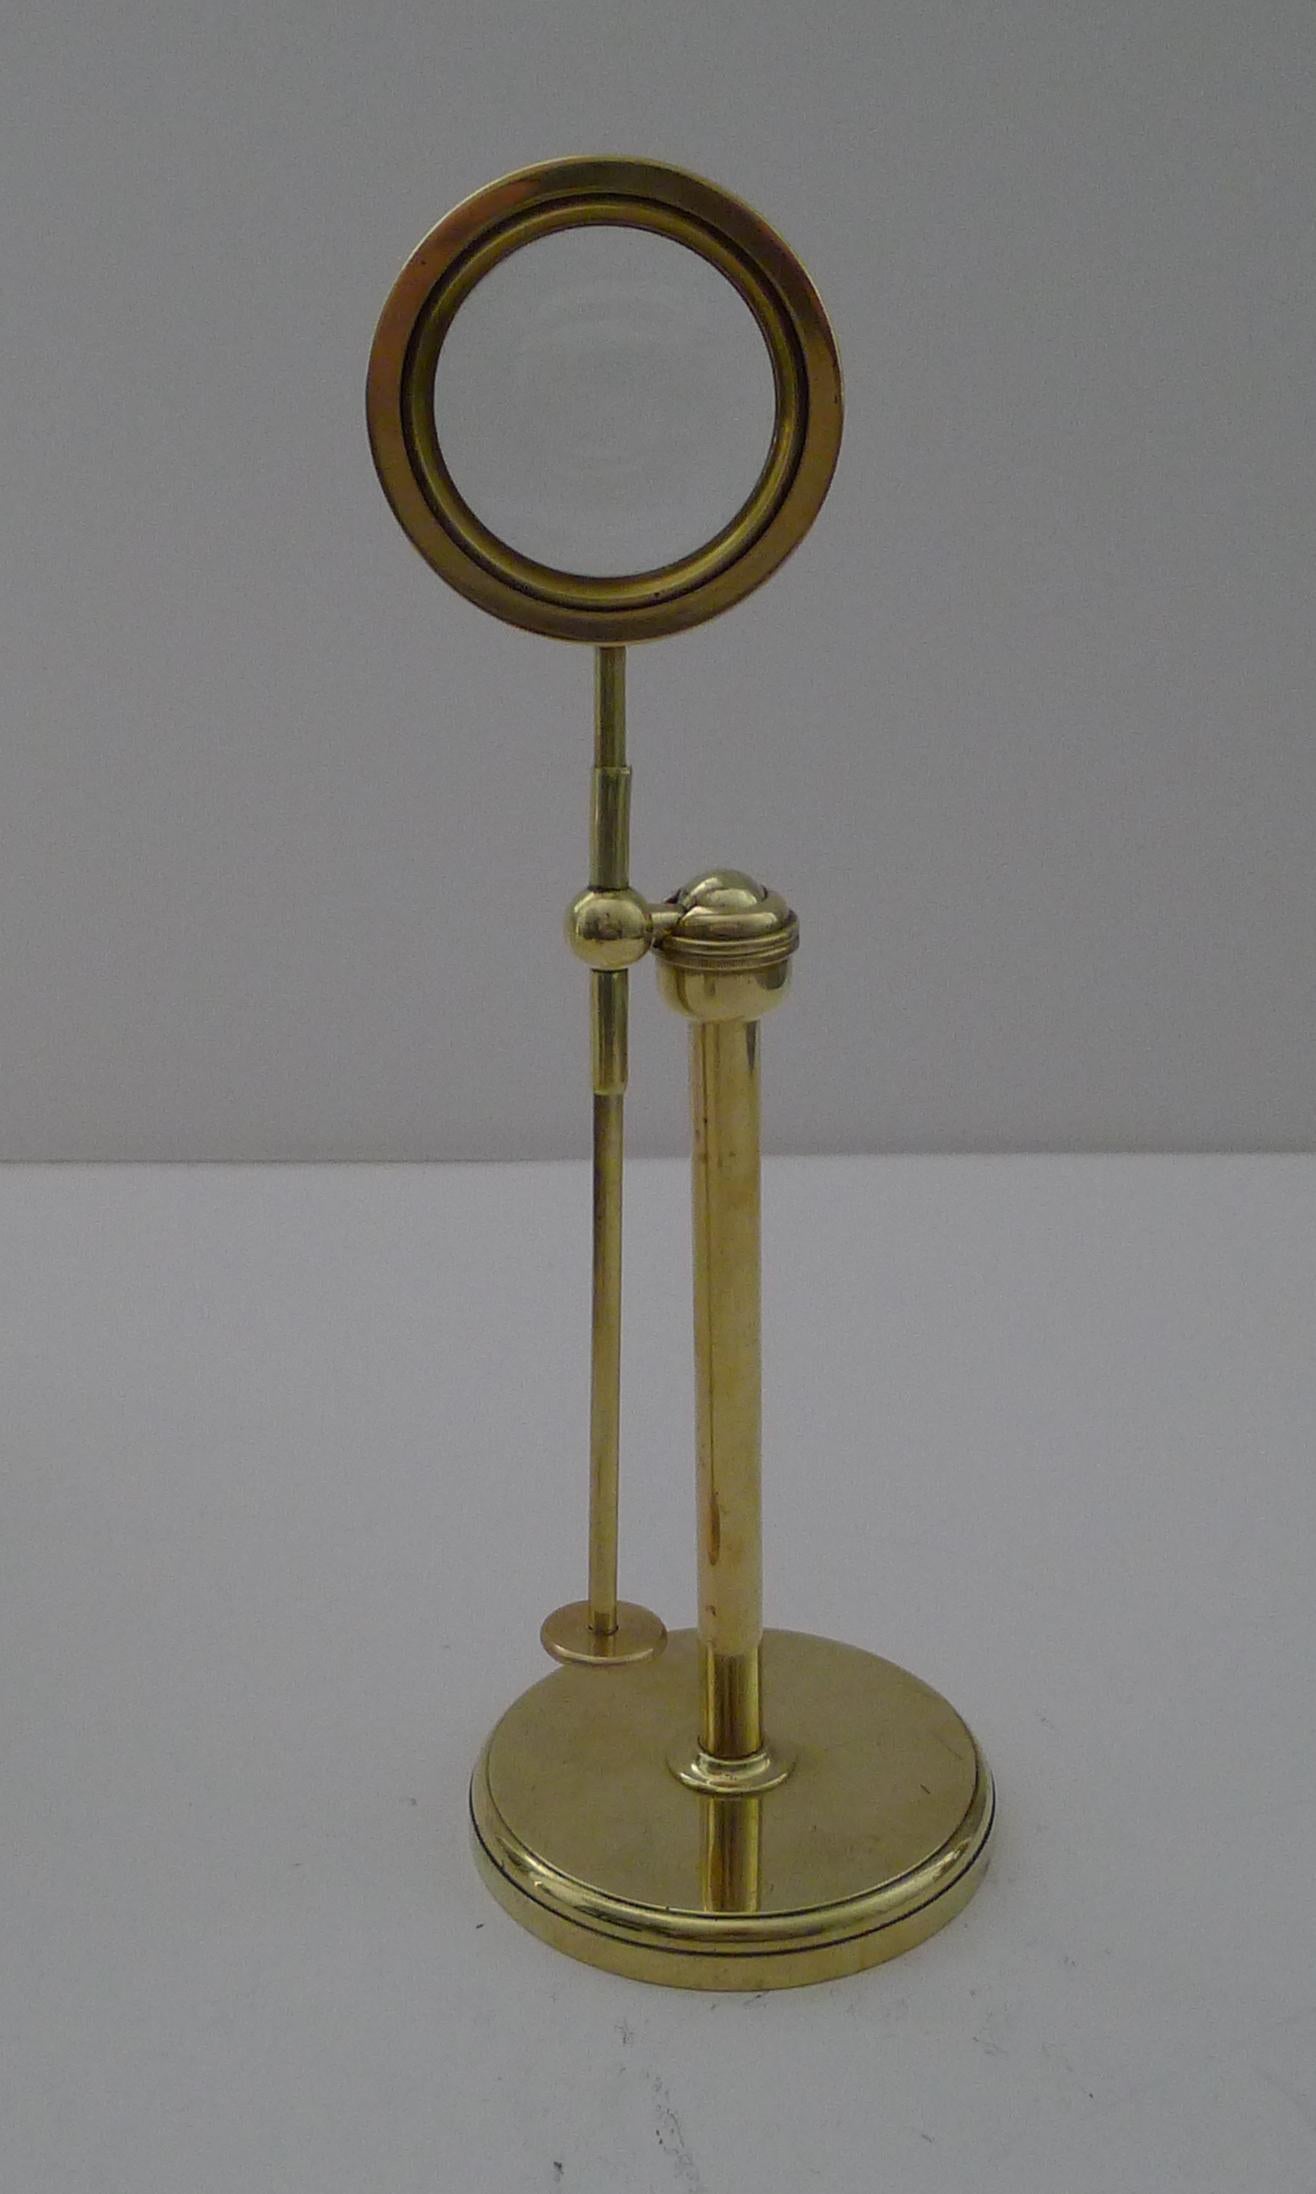 English Edwardian Brass Pivoting Magnifying Glass on Stand c.1900 For Sale 1